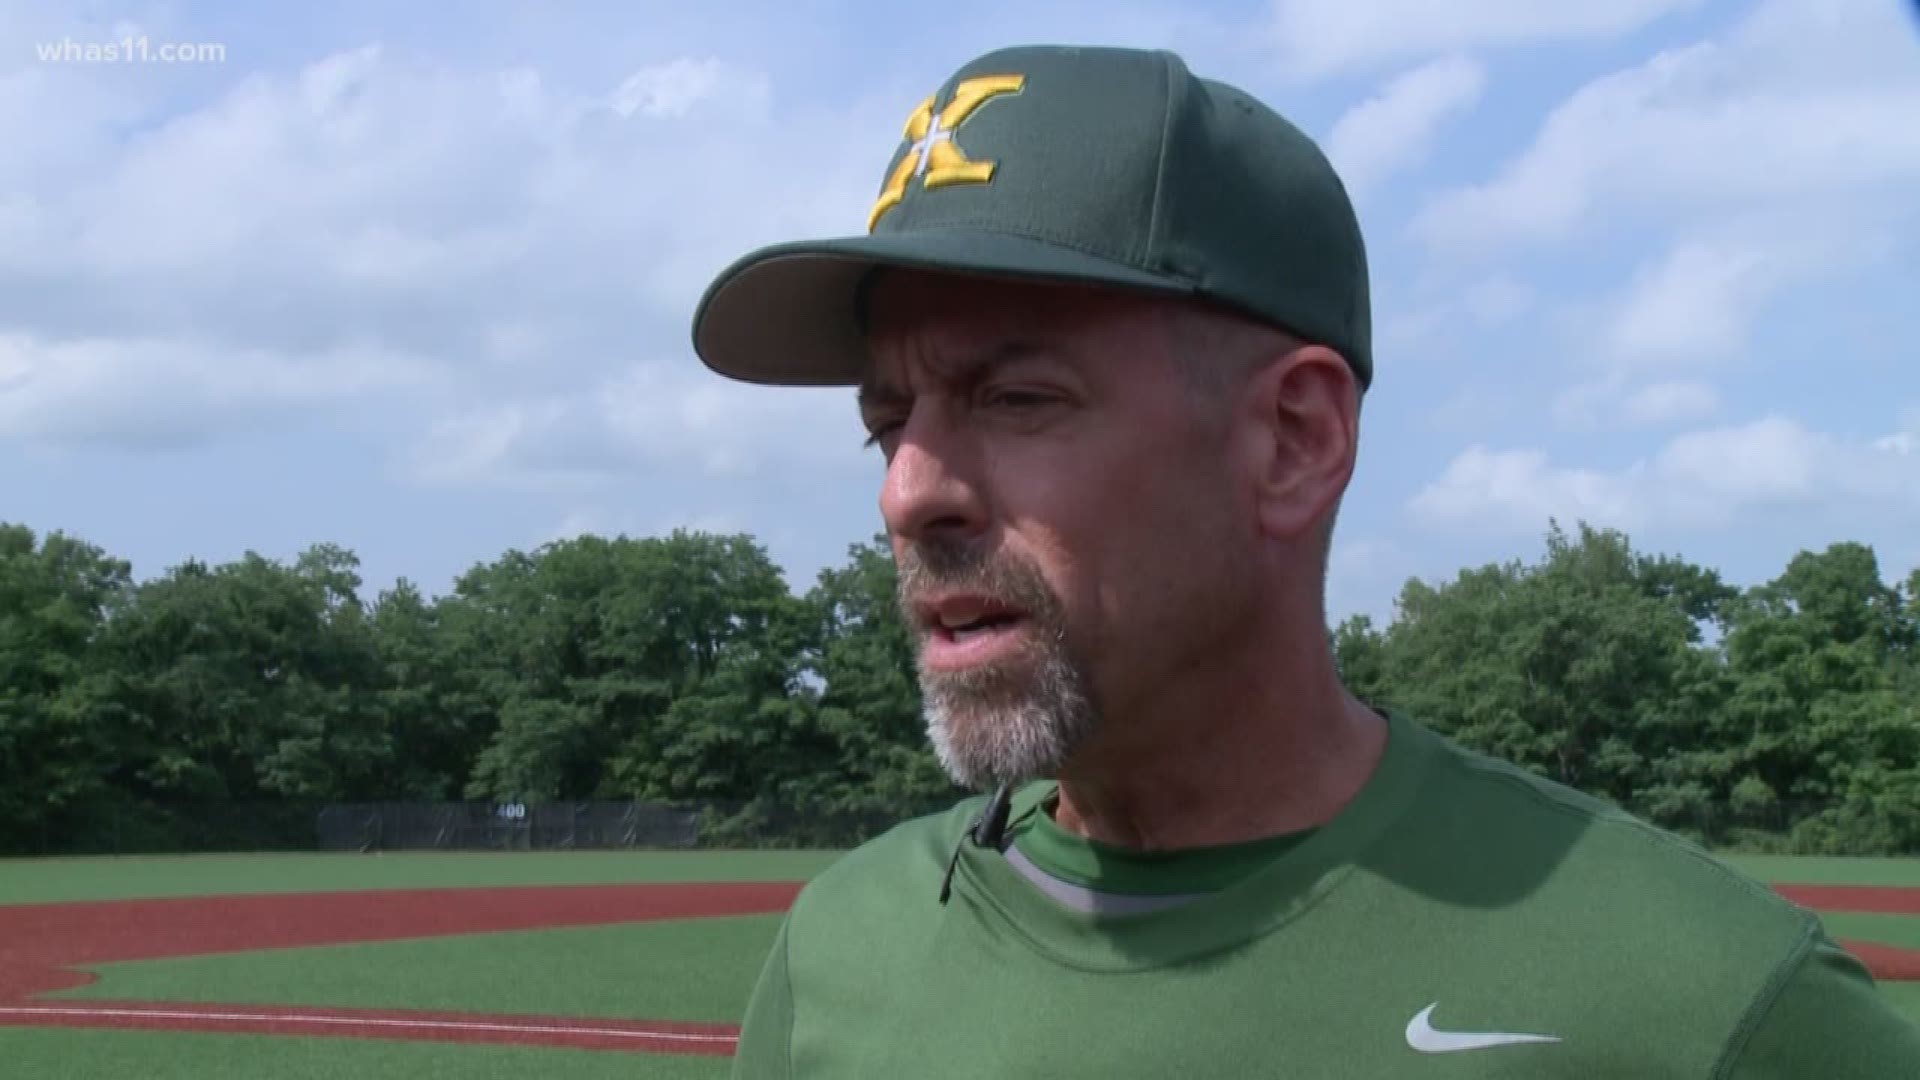 This past weekend they got one step closer beating Boyle County 9-5 in the state quarterfinals. So now, St X is back in the baseball final four this Friday in Lexington, and while many expected the Tigers to be here, it doesn't mean this group is taking